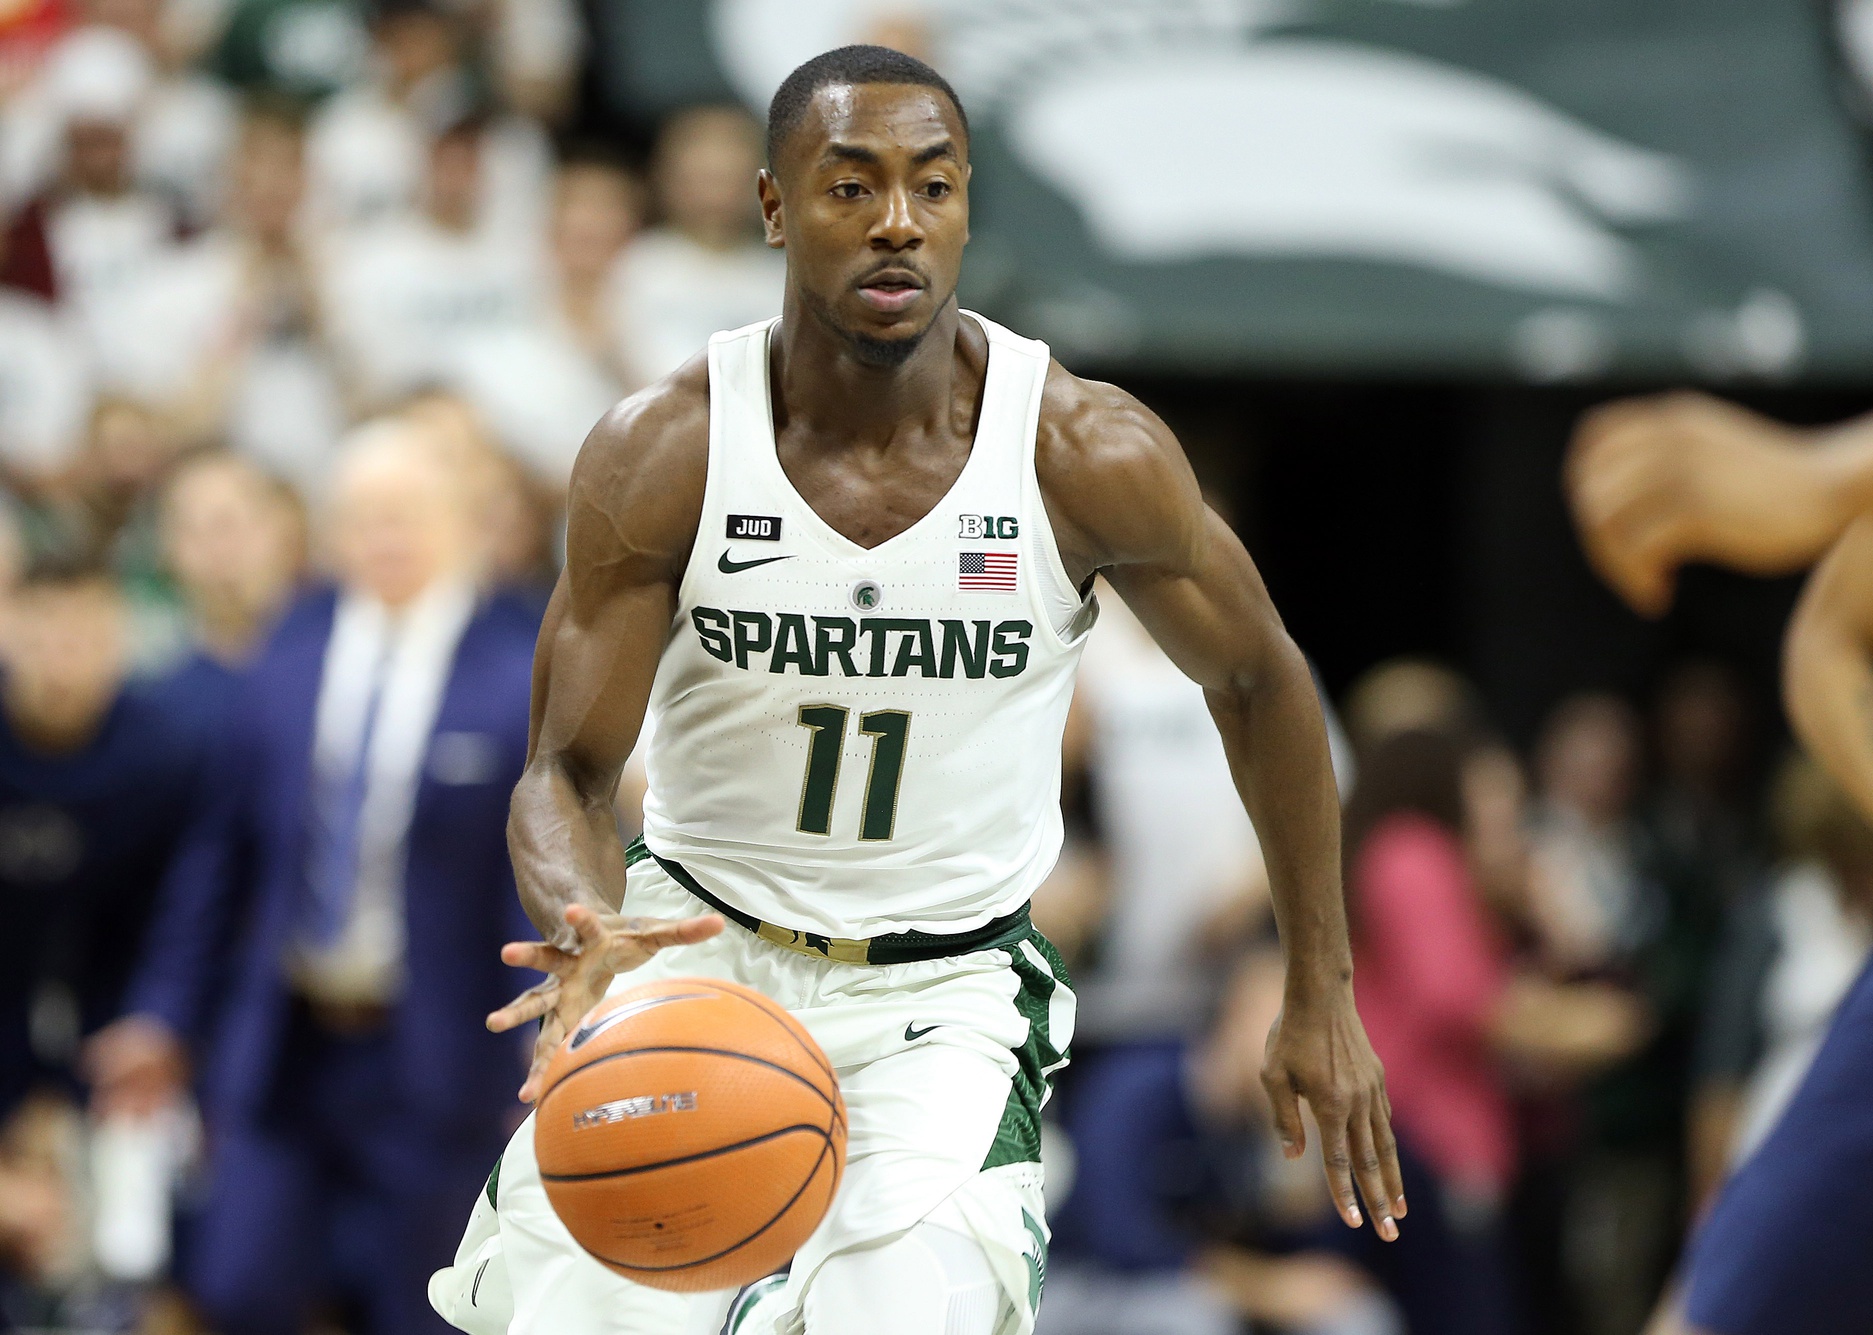 Former Michigan State point guard Tum Tum Nairn dribbles up the floor.